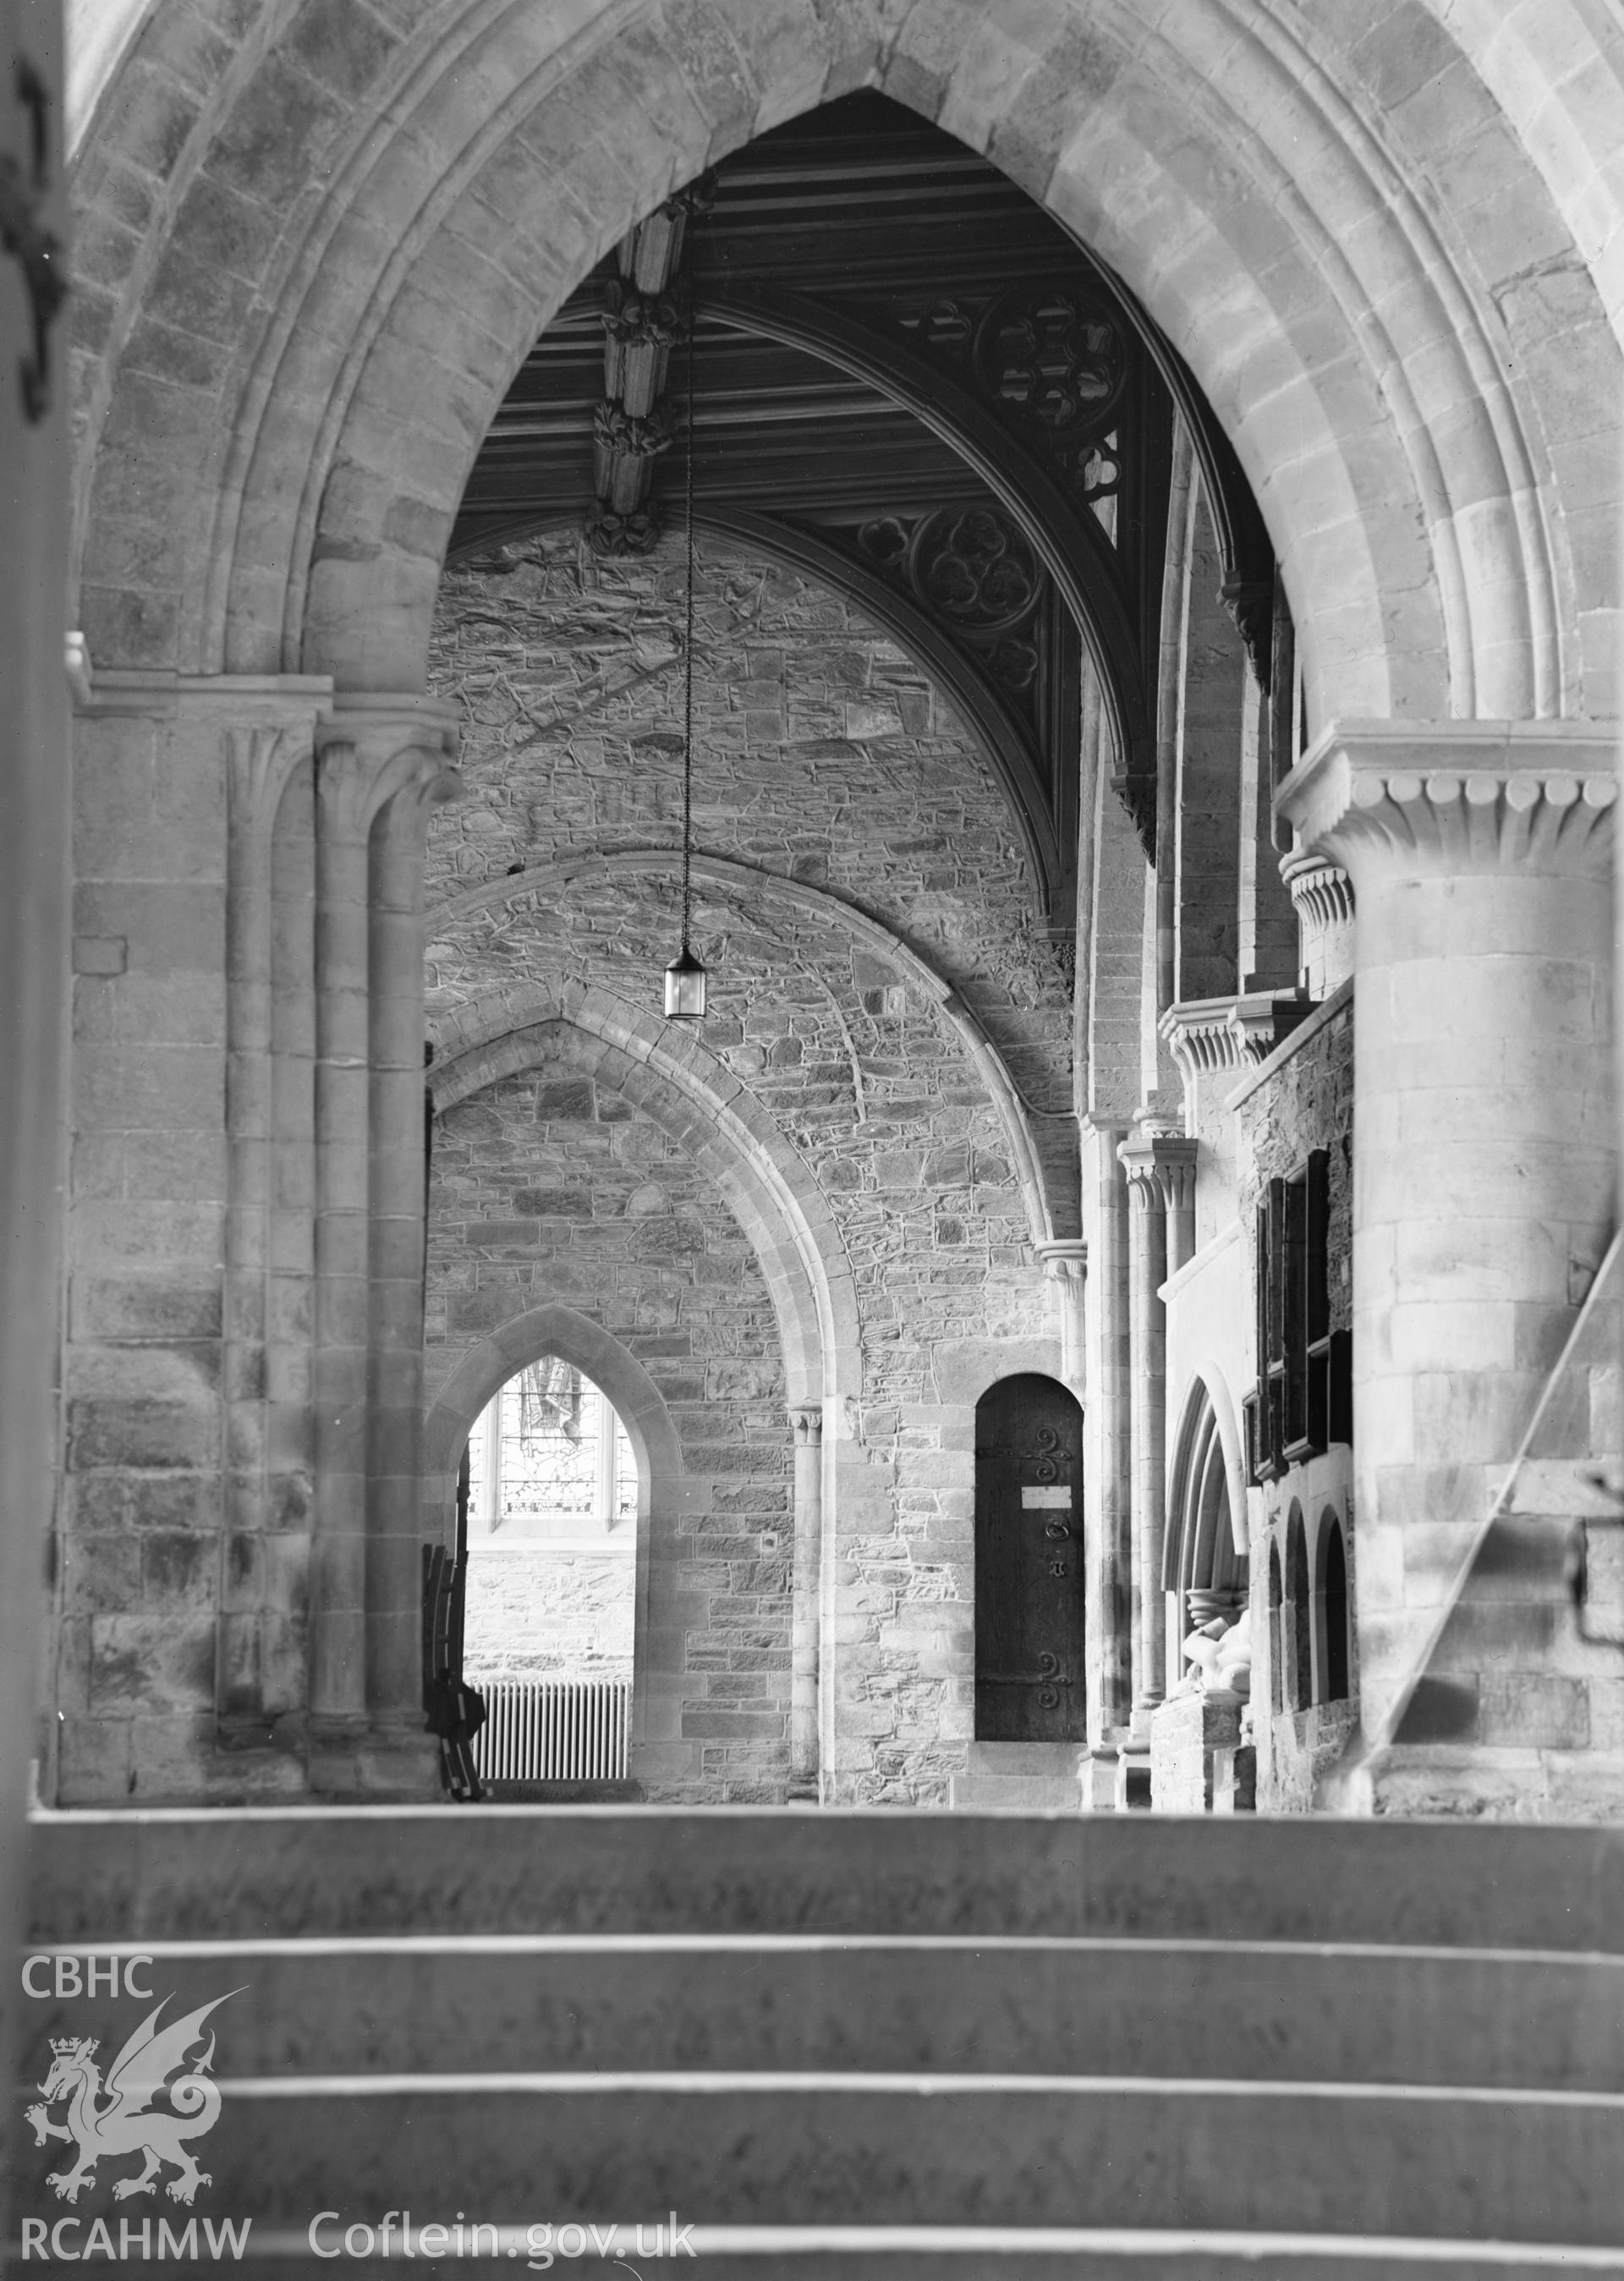 Digital copy of a black and white nitrate negative showing interior view of entrance at St. David's Cathedral, taken by E.W. Lovegrove, July 1936.